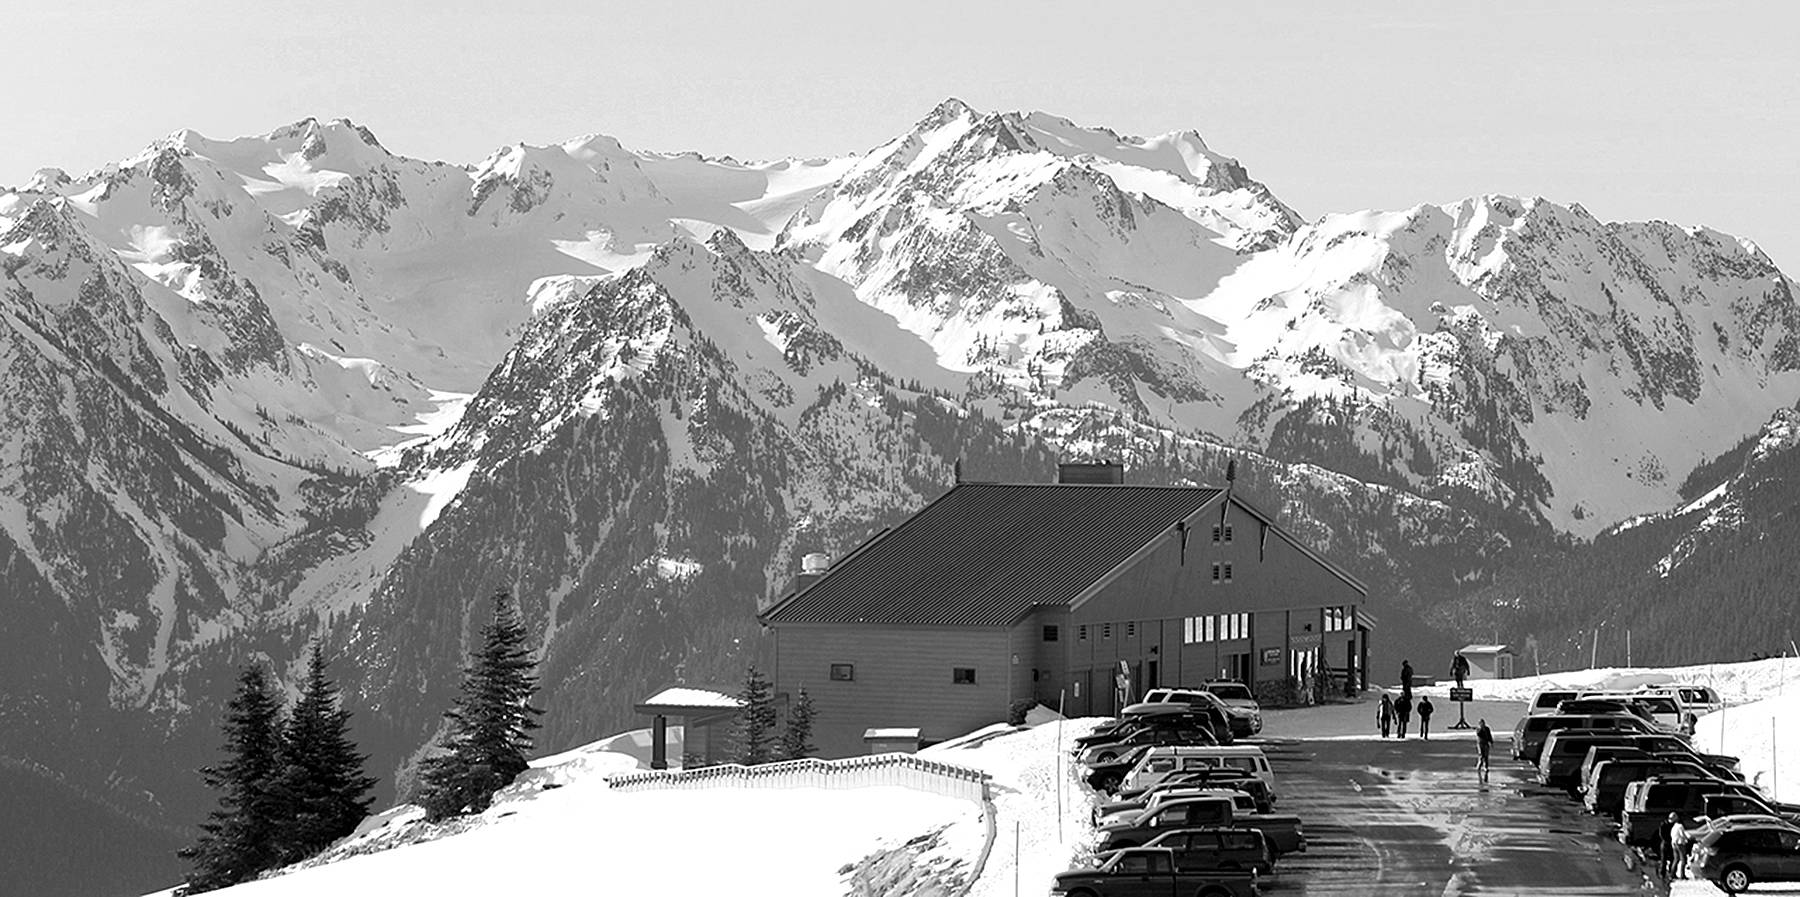 Limited Access to Olympic National Park during government shutdown